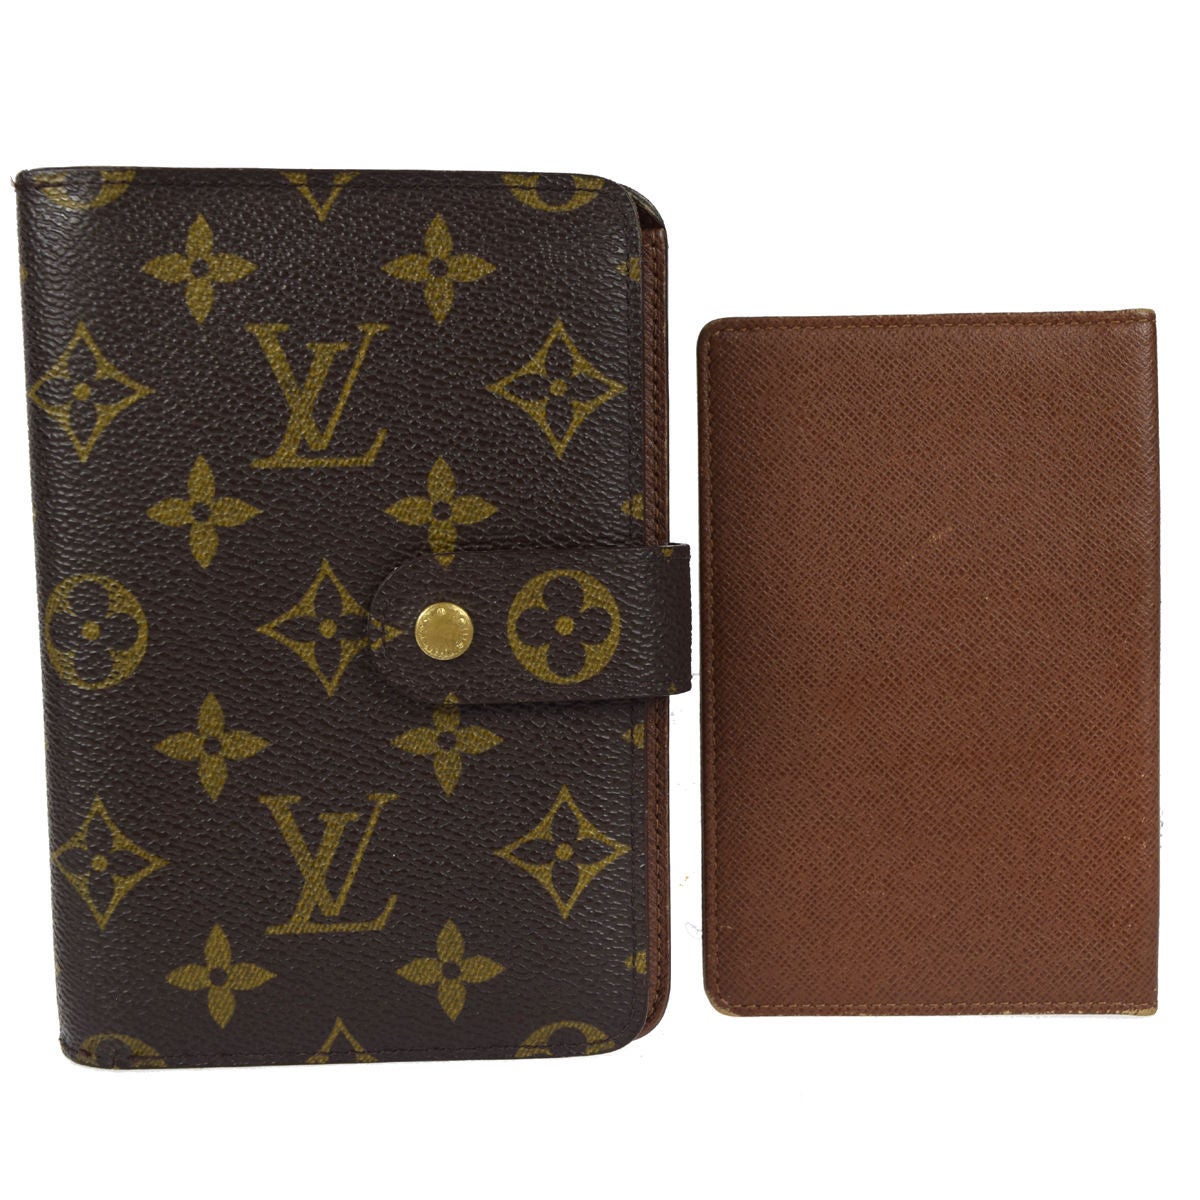 Louis Vuitton Porutopapie wallet with card sleeve For Sale 4